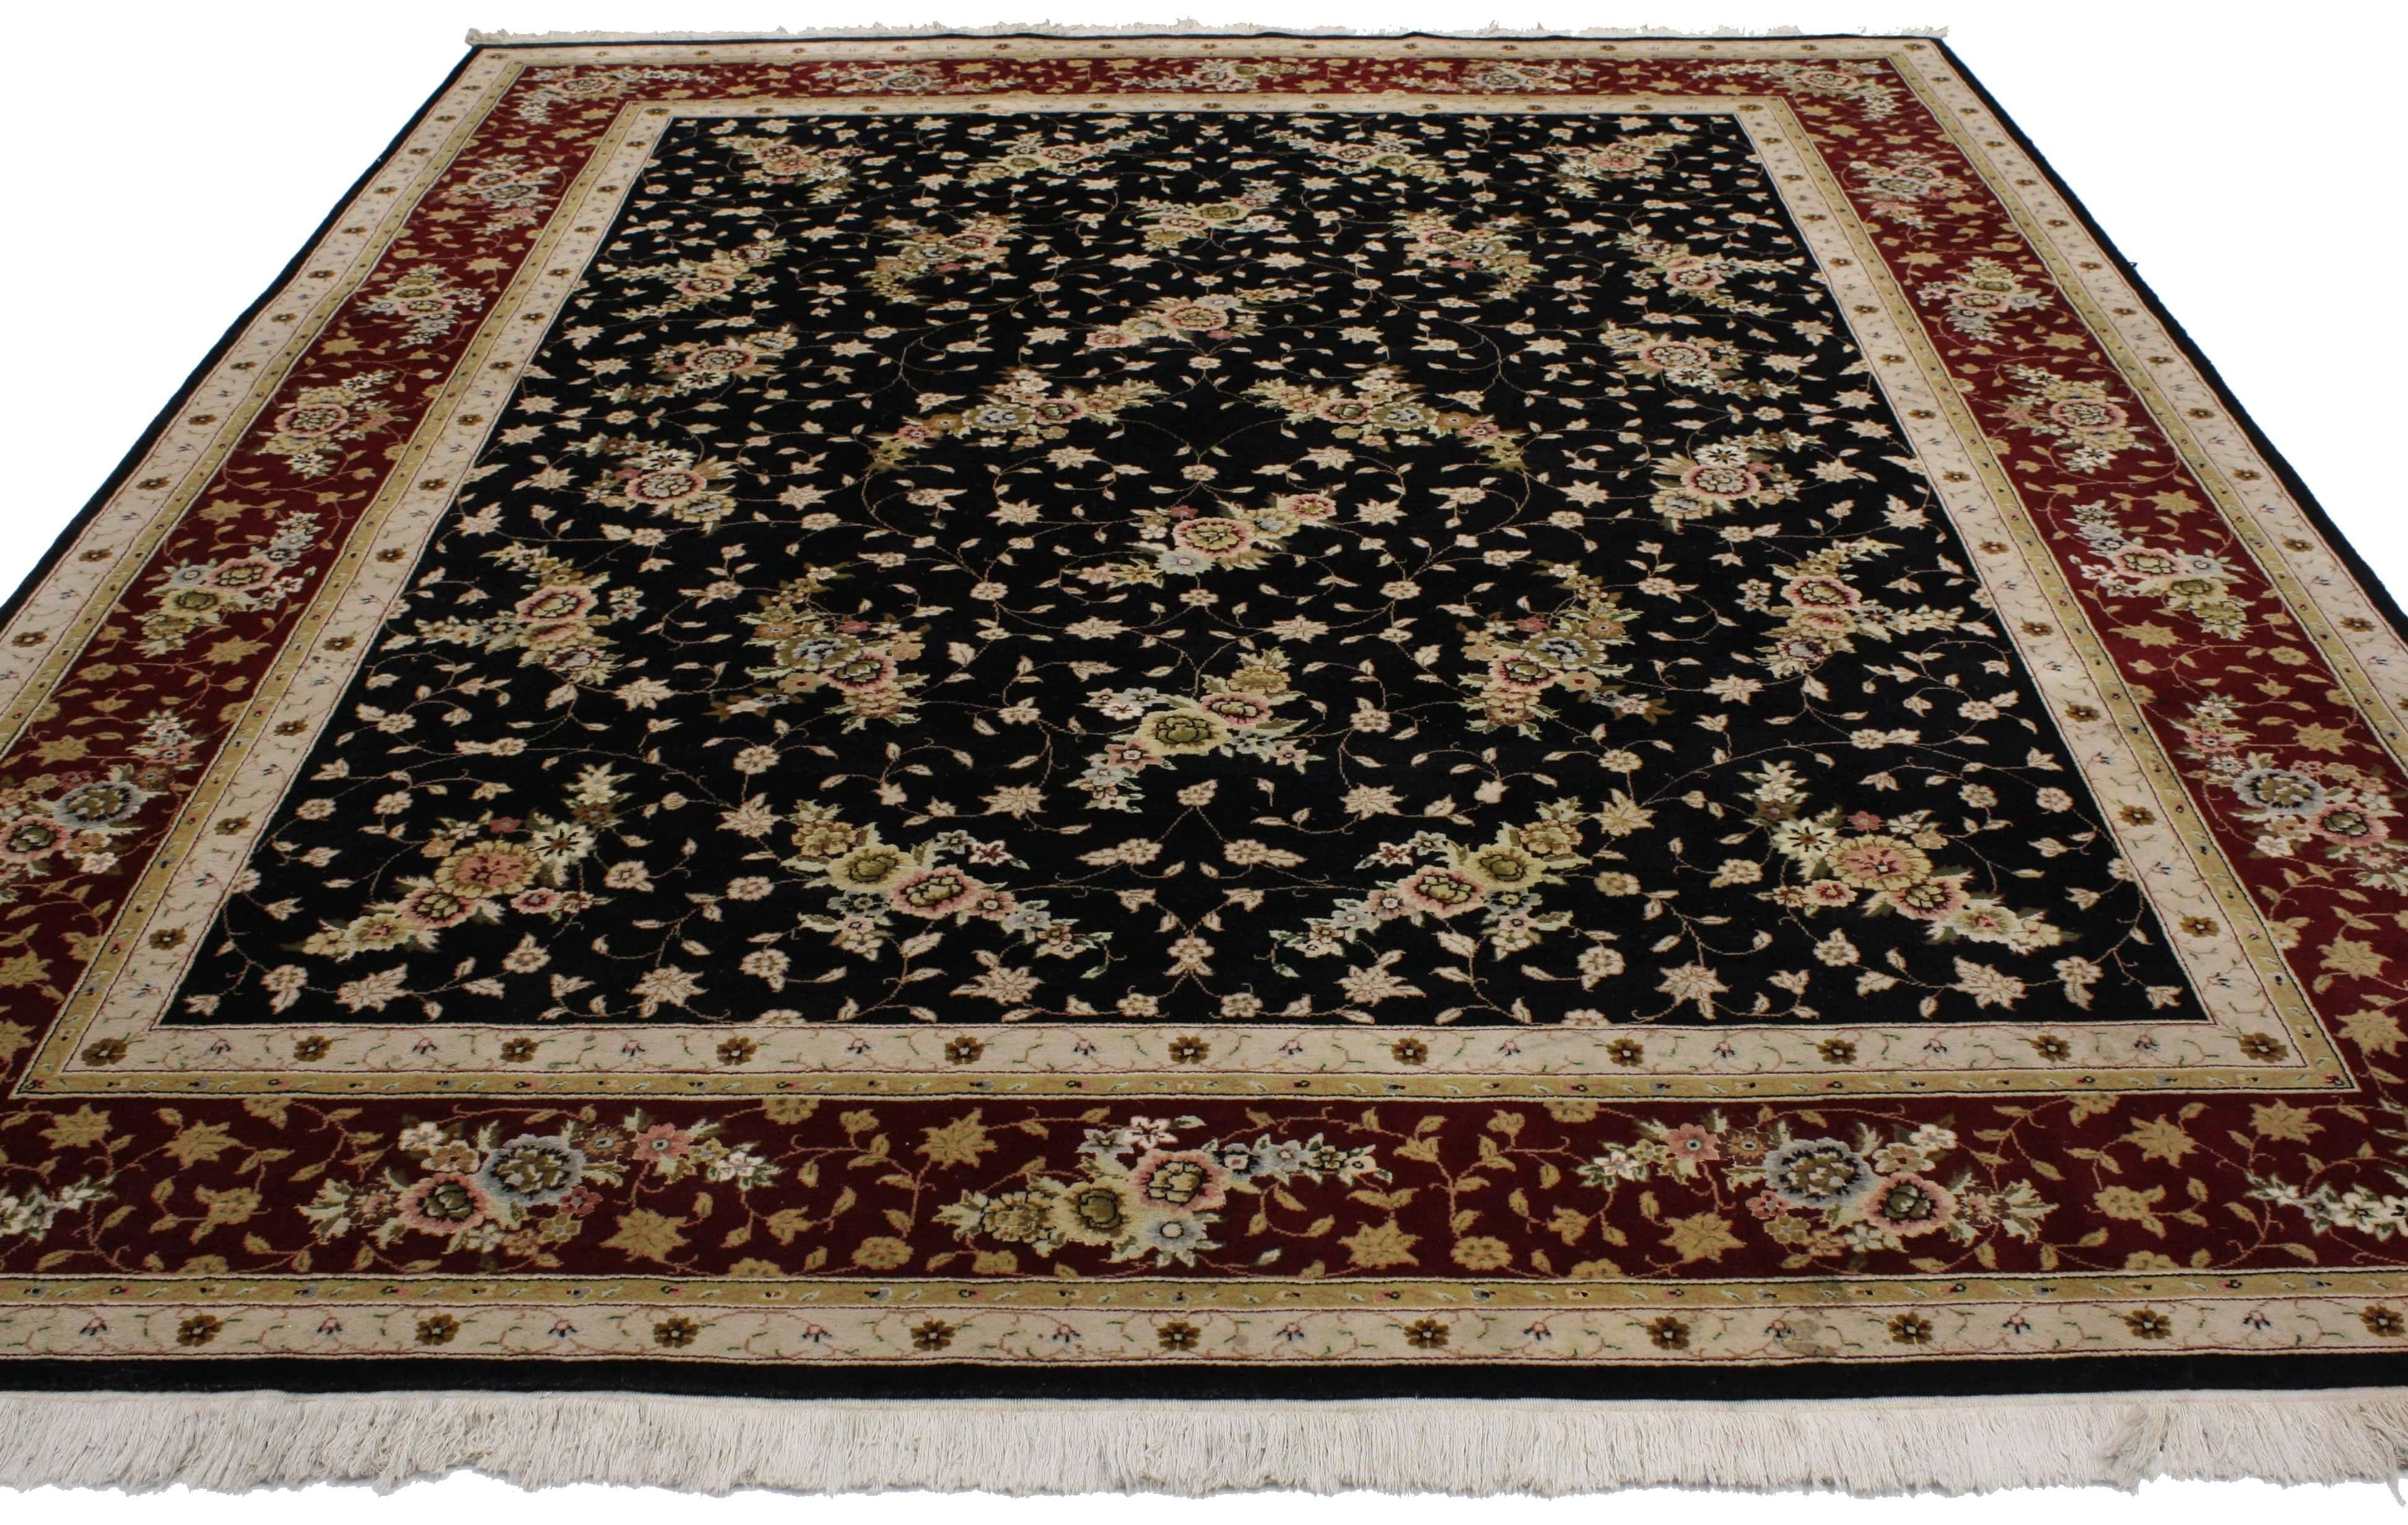 76703, vintage Persian style rug with traditional style. Opulent and whimsical, this hand knotted wool vintage Persian style rug with traditional style features an all-over floral pattern of an undulating tendril lattice against an ink black